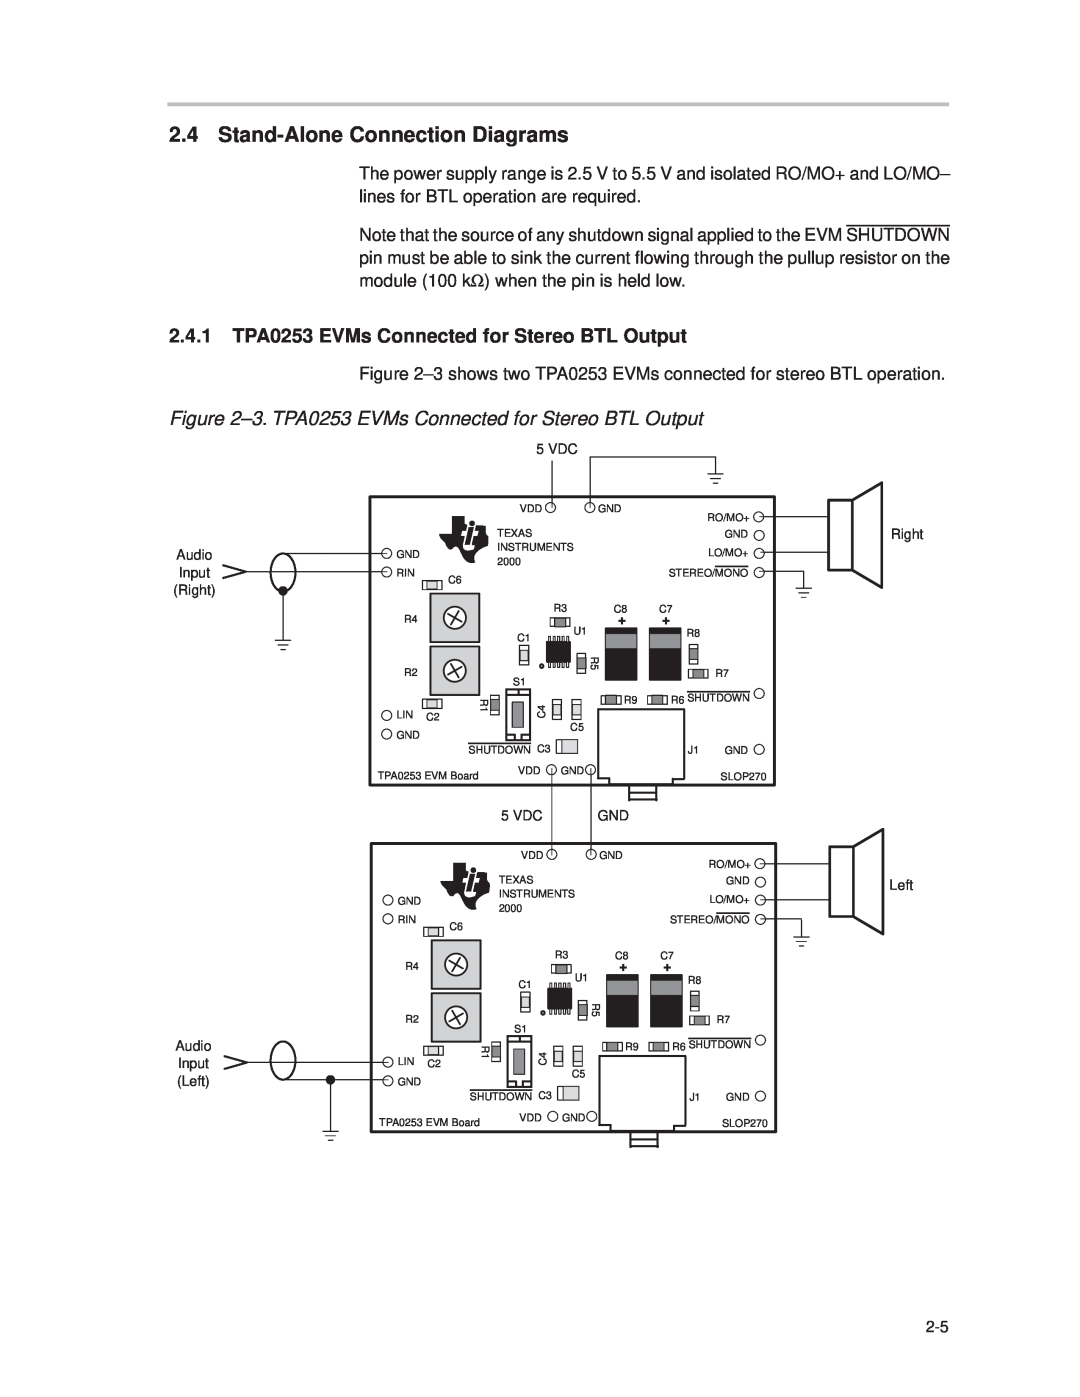 Texas Instruments manual Stand-AloneConnection Diagrams, 2.4.1TPA0253 EVMs Connected for Stereo BTL Output 